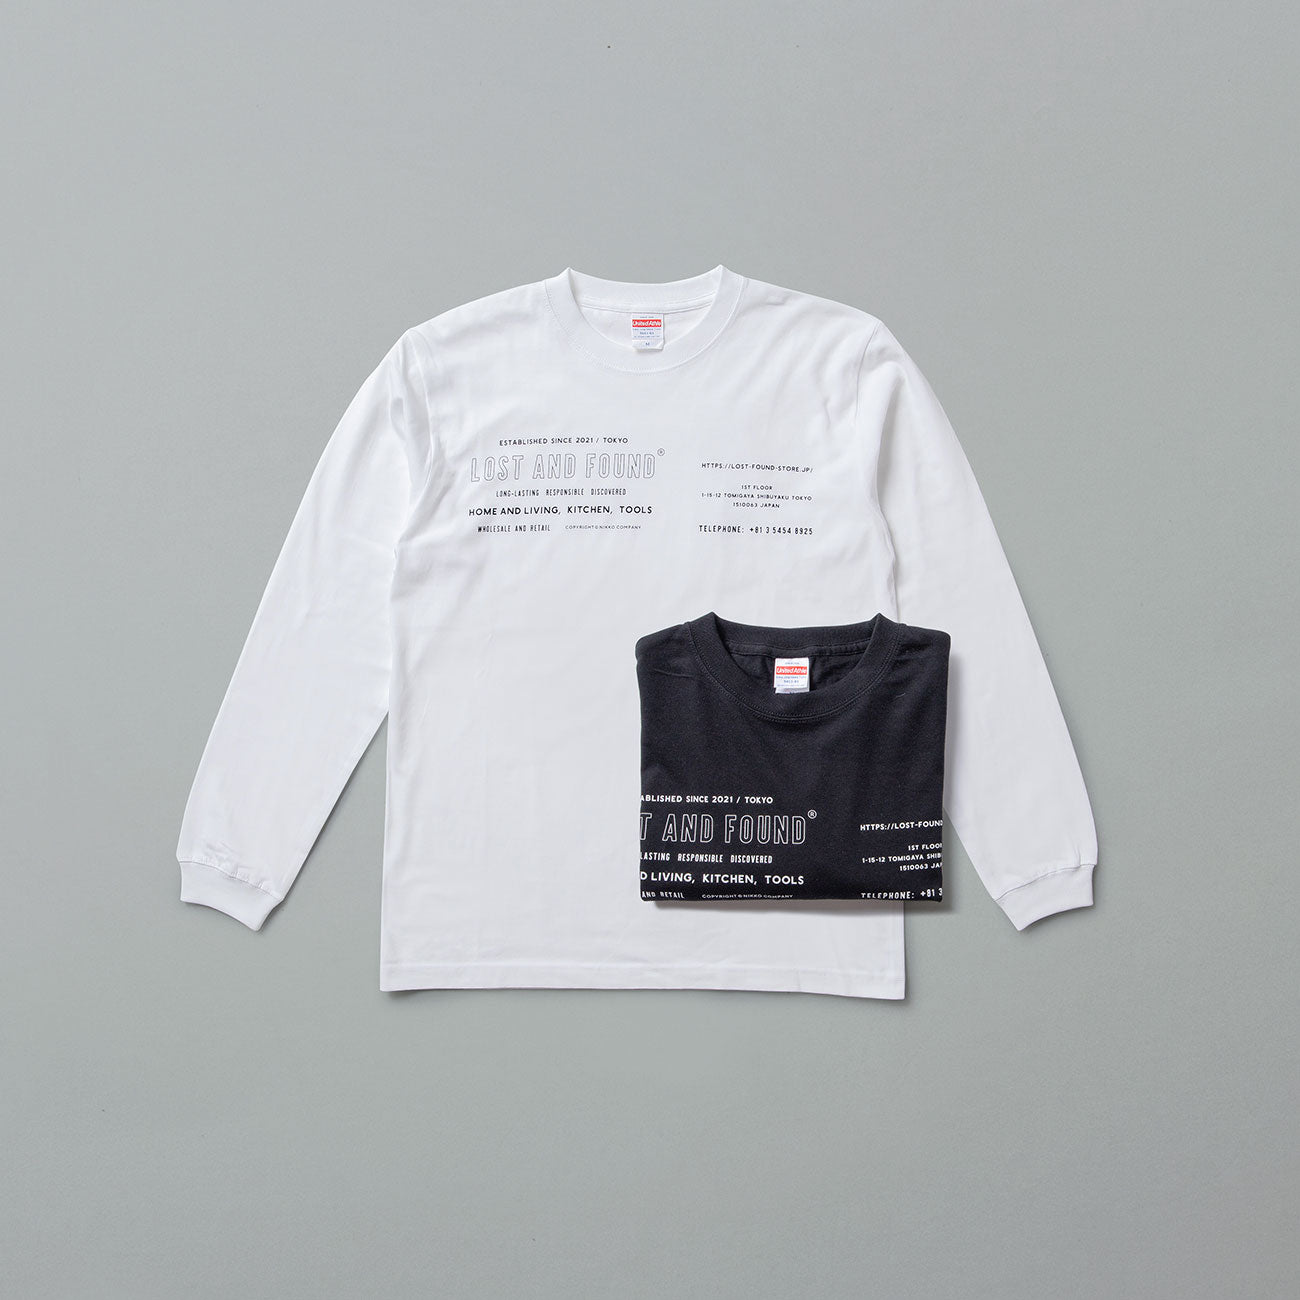 LOST AND FOUND ORIGINAL LONG T-SHIRT L(WHITE)